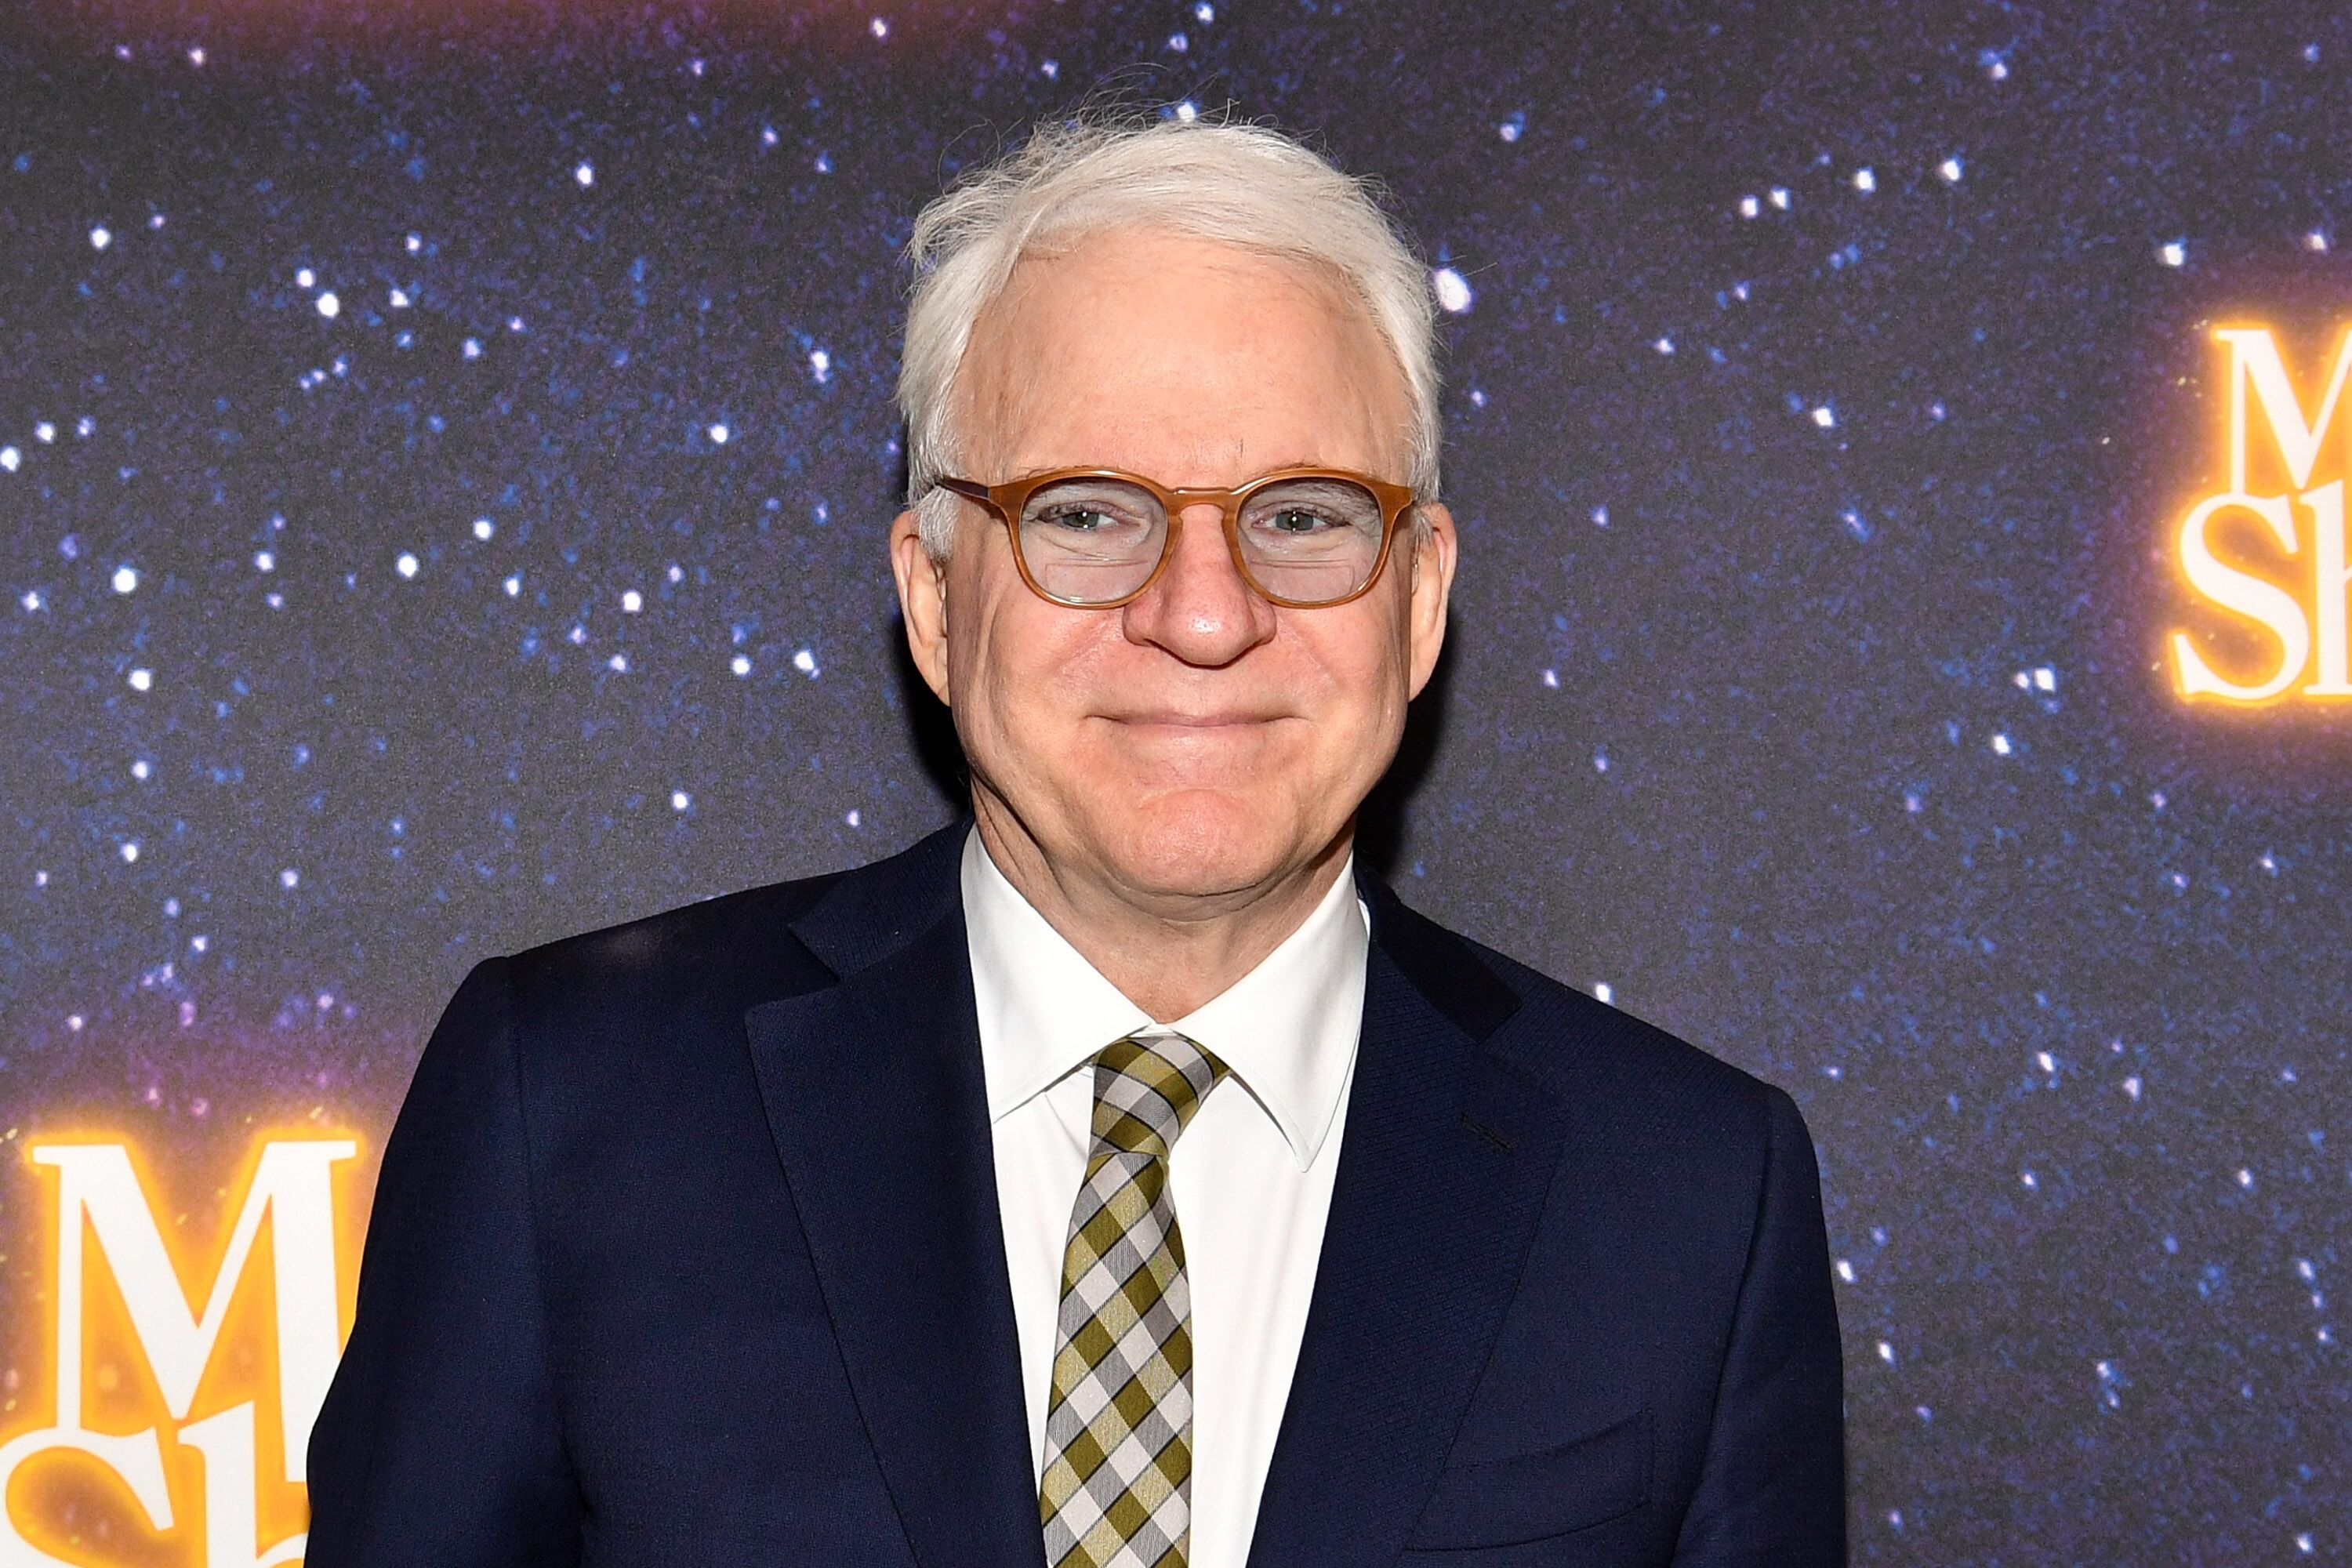 Steve Martin attends the "Meteor Shower" Broadway Opening Night at the Booth Theatre. | Source: Getty Images